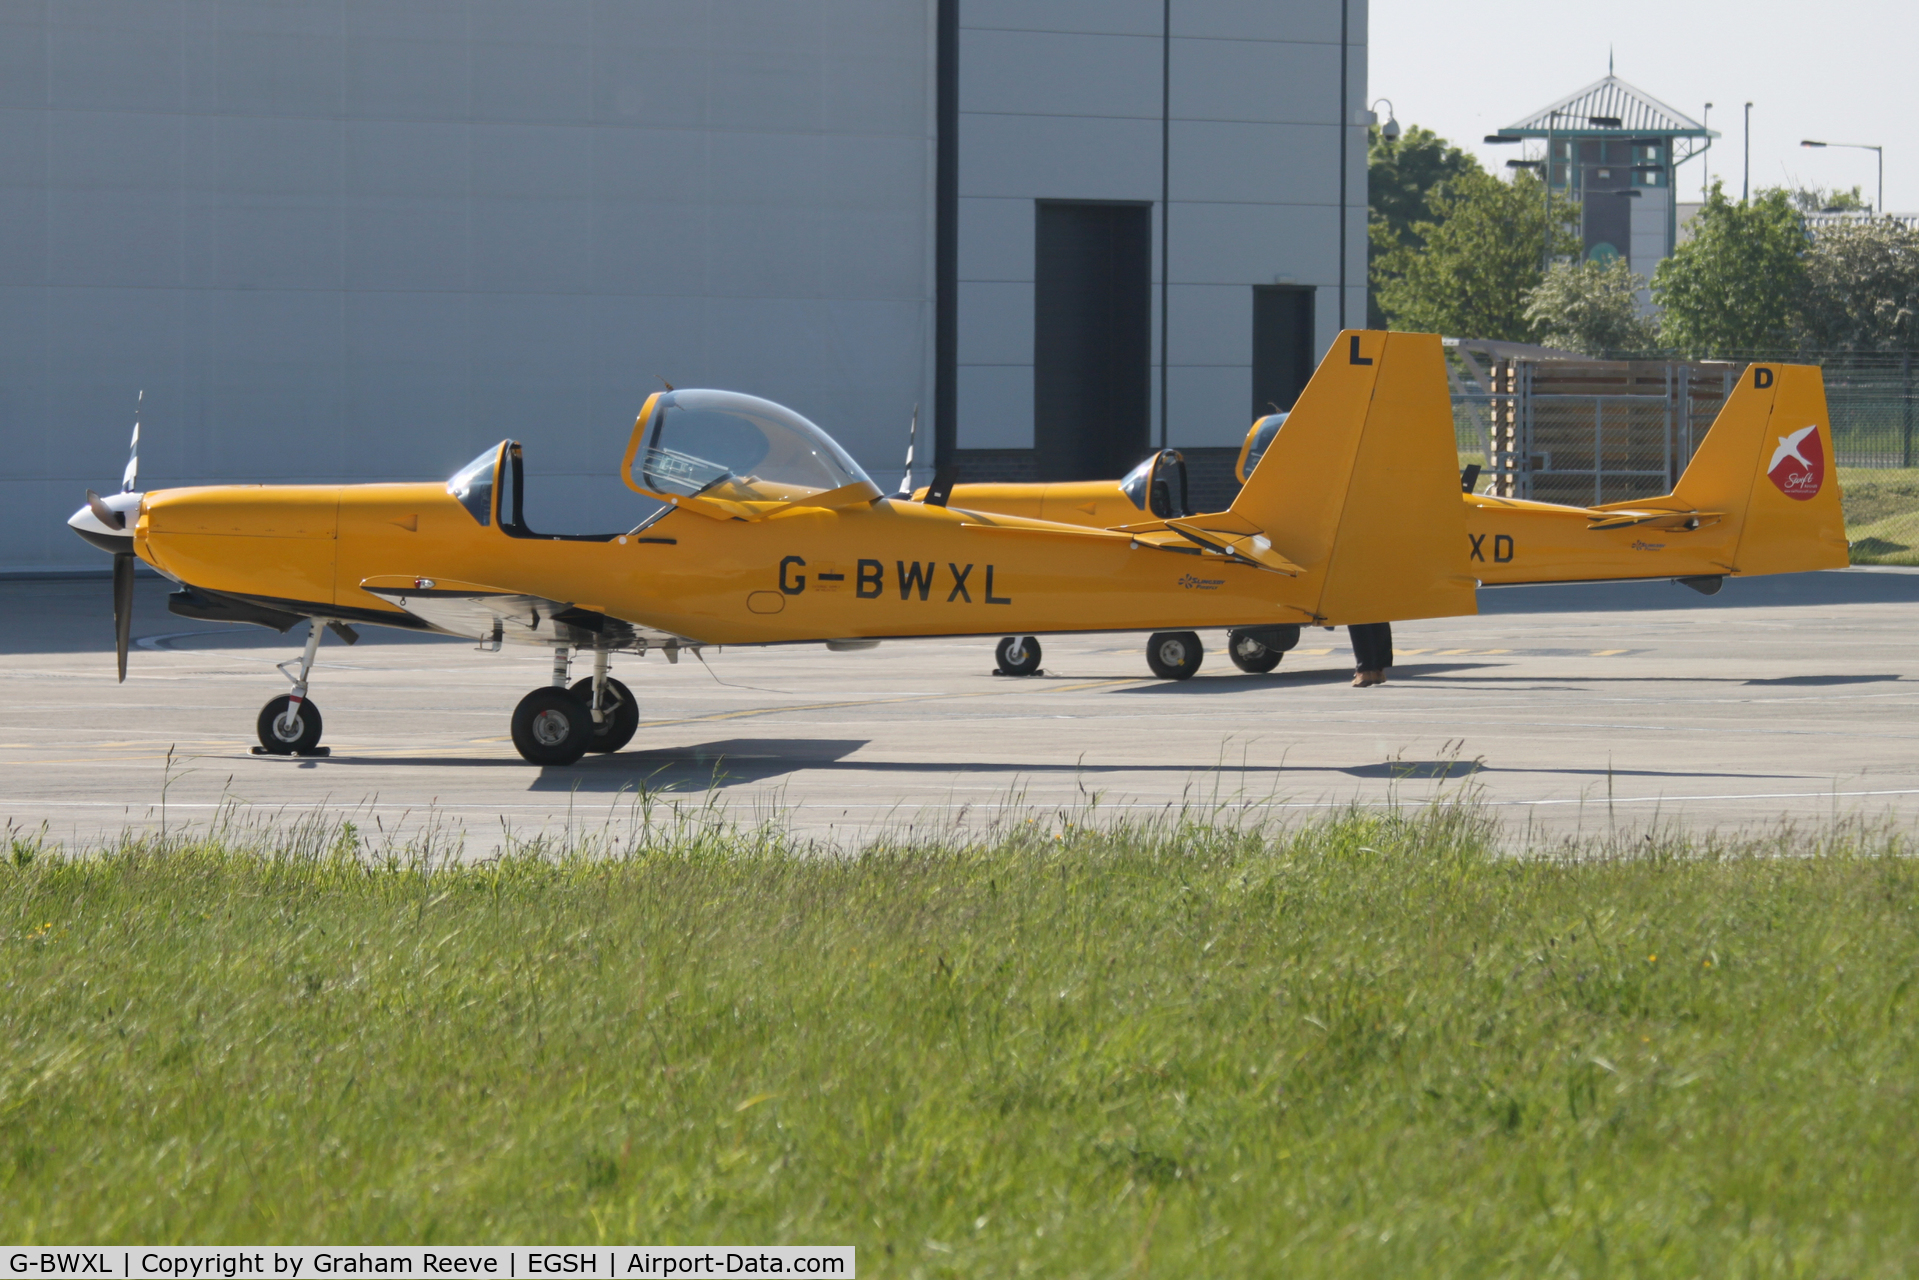 G-BWXL, 1996 Slingsby T-67M-260 Firefly C/N 2247, With G-BWXD behind.